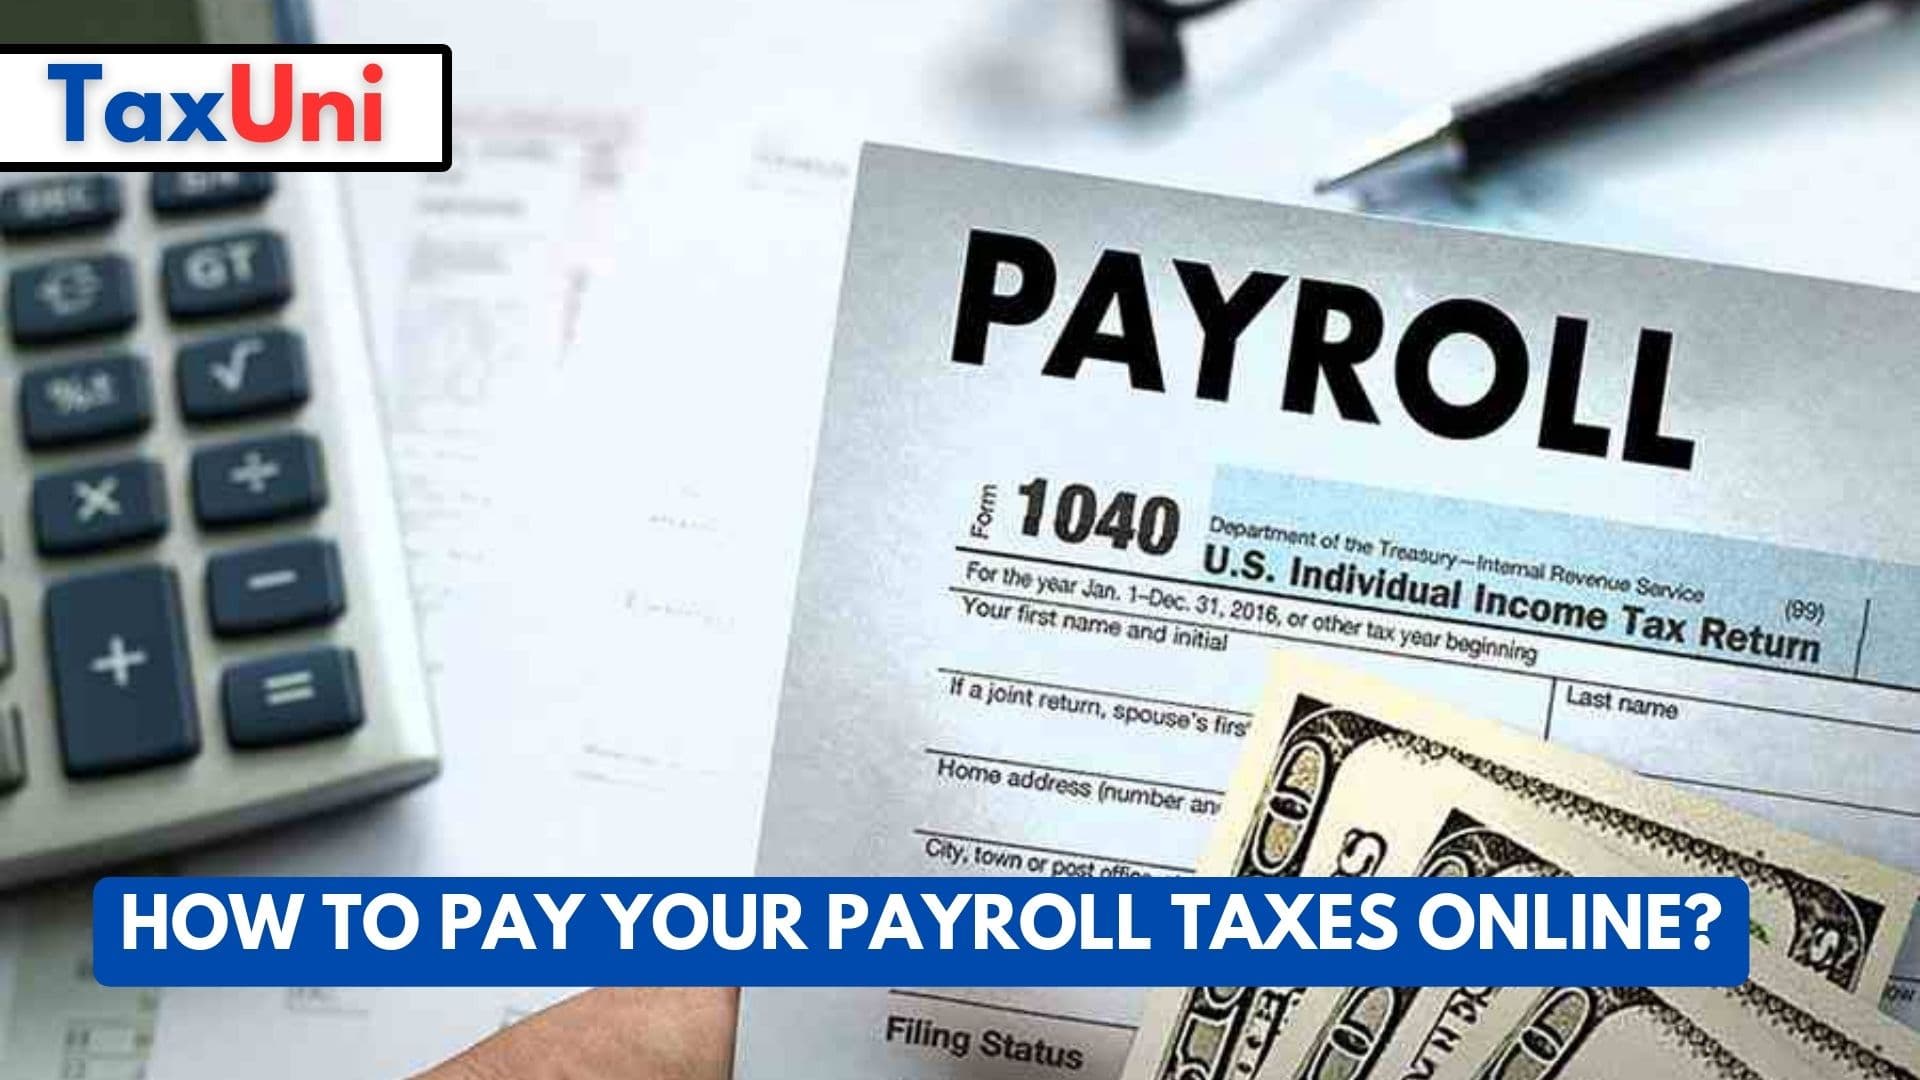 How to Pay Your Payroll Taxes Online